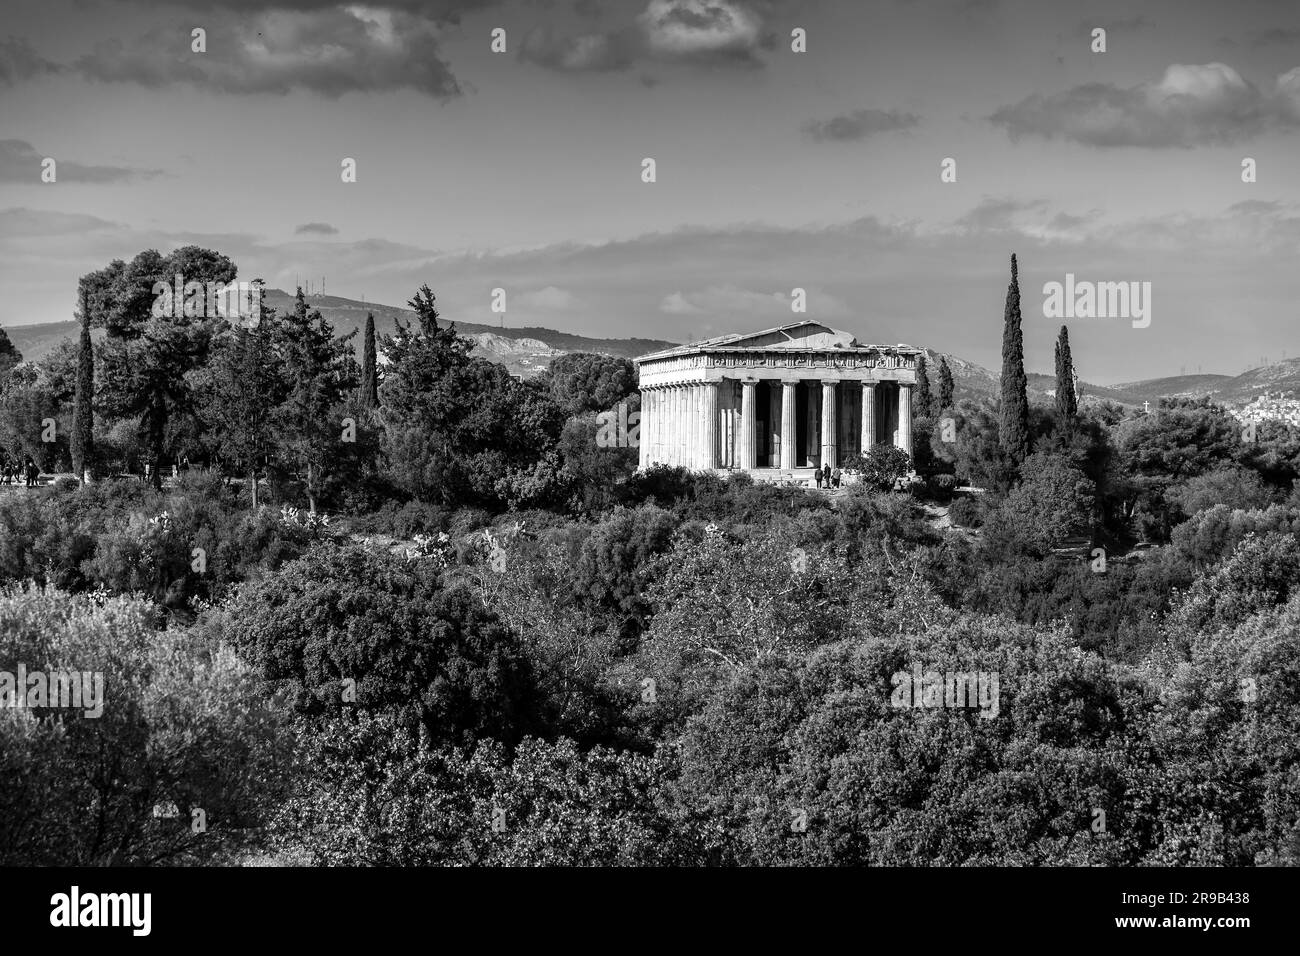 The Temple of Hephaestus or Hephaisteion is a well-preserved Greek temple dedicated to Hephaestus, in Athens, Greece. Stock Photo